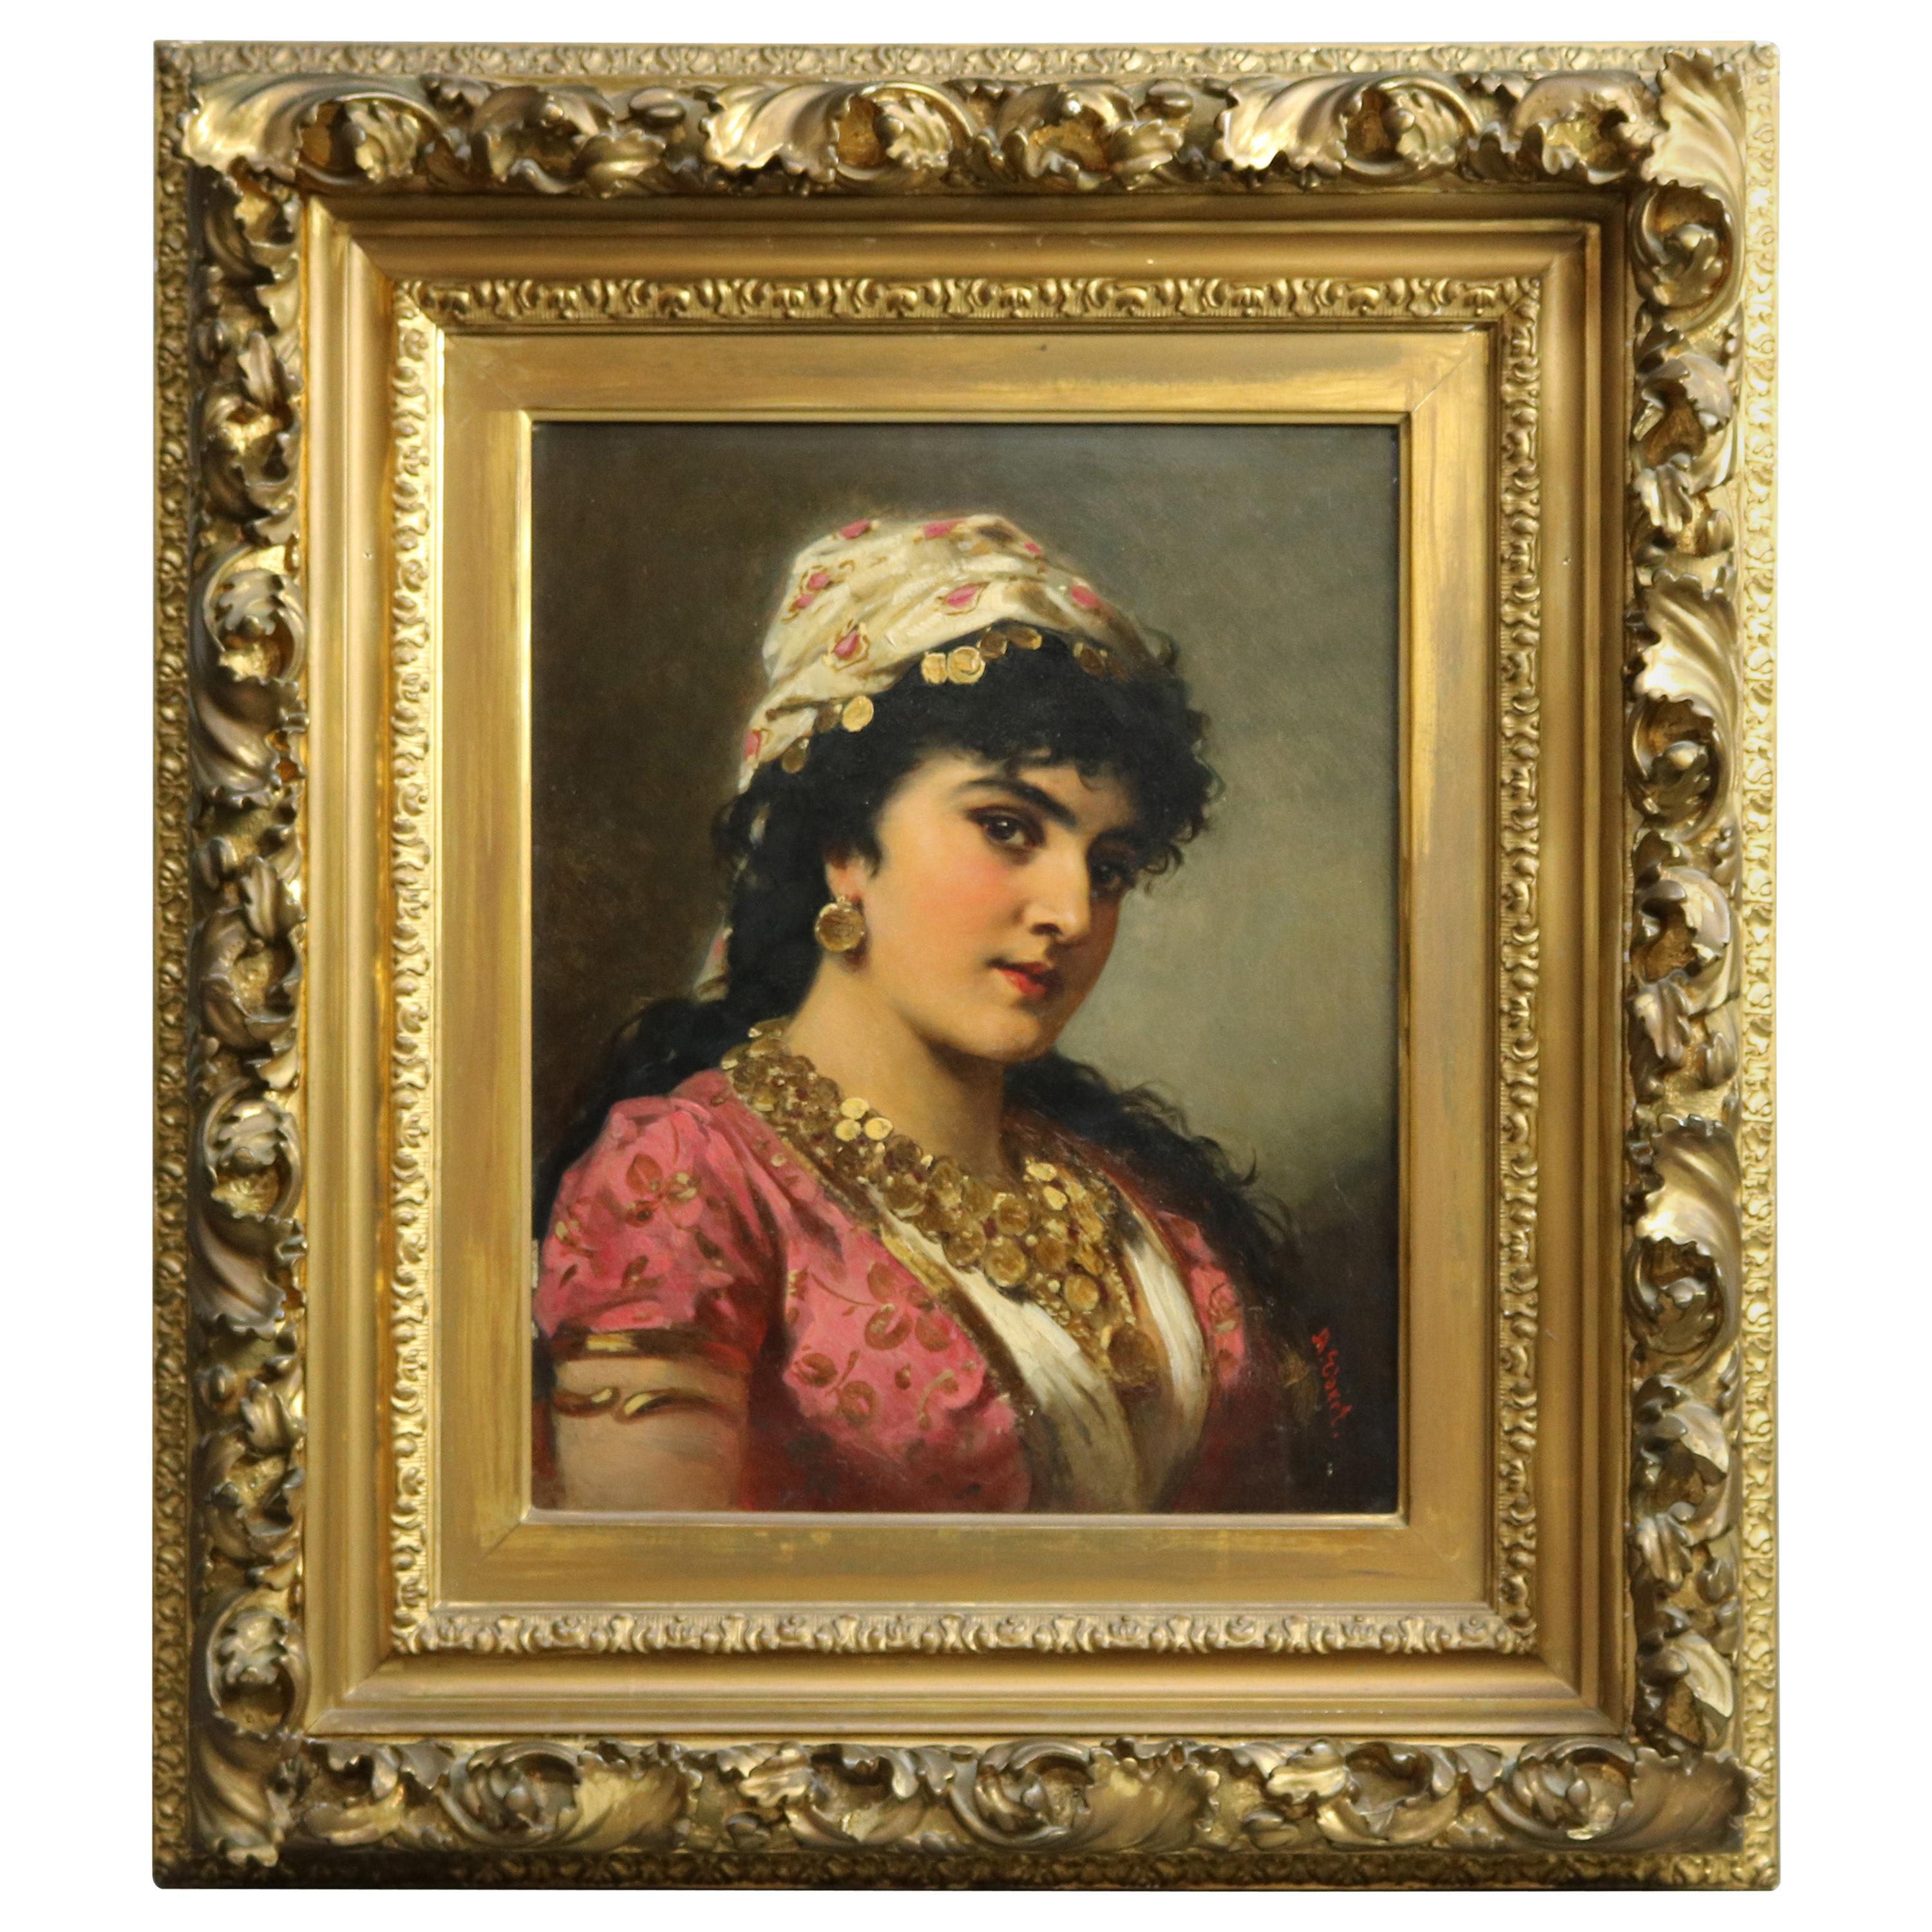 Antique Oil on Board Portrait Painting of a Young Woman by Anton Ebert